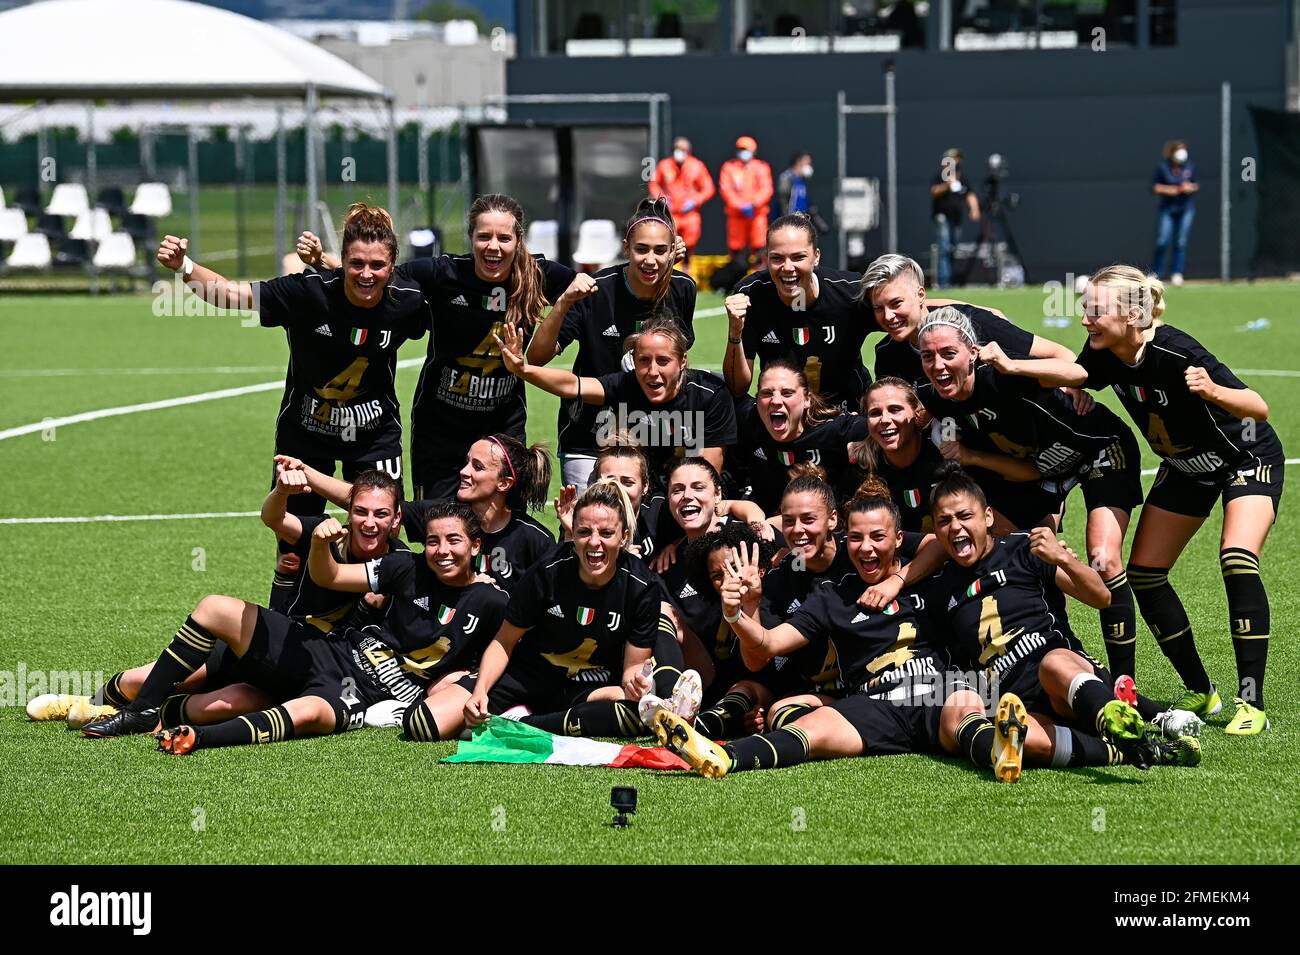 Vinovo, Italy. 08 May 2021. Players of Juventus FC celebrate the Juventus FC 4th successive Italian Championship title following the final whistle of the Women Serie A football match between Juventus FC and SSD Napoli. Juventus FC won 2-0 over SSD Napoli. Credit: Nicolò Campo/Alamy Live News Stock Photo